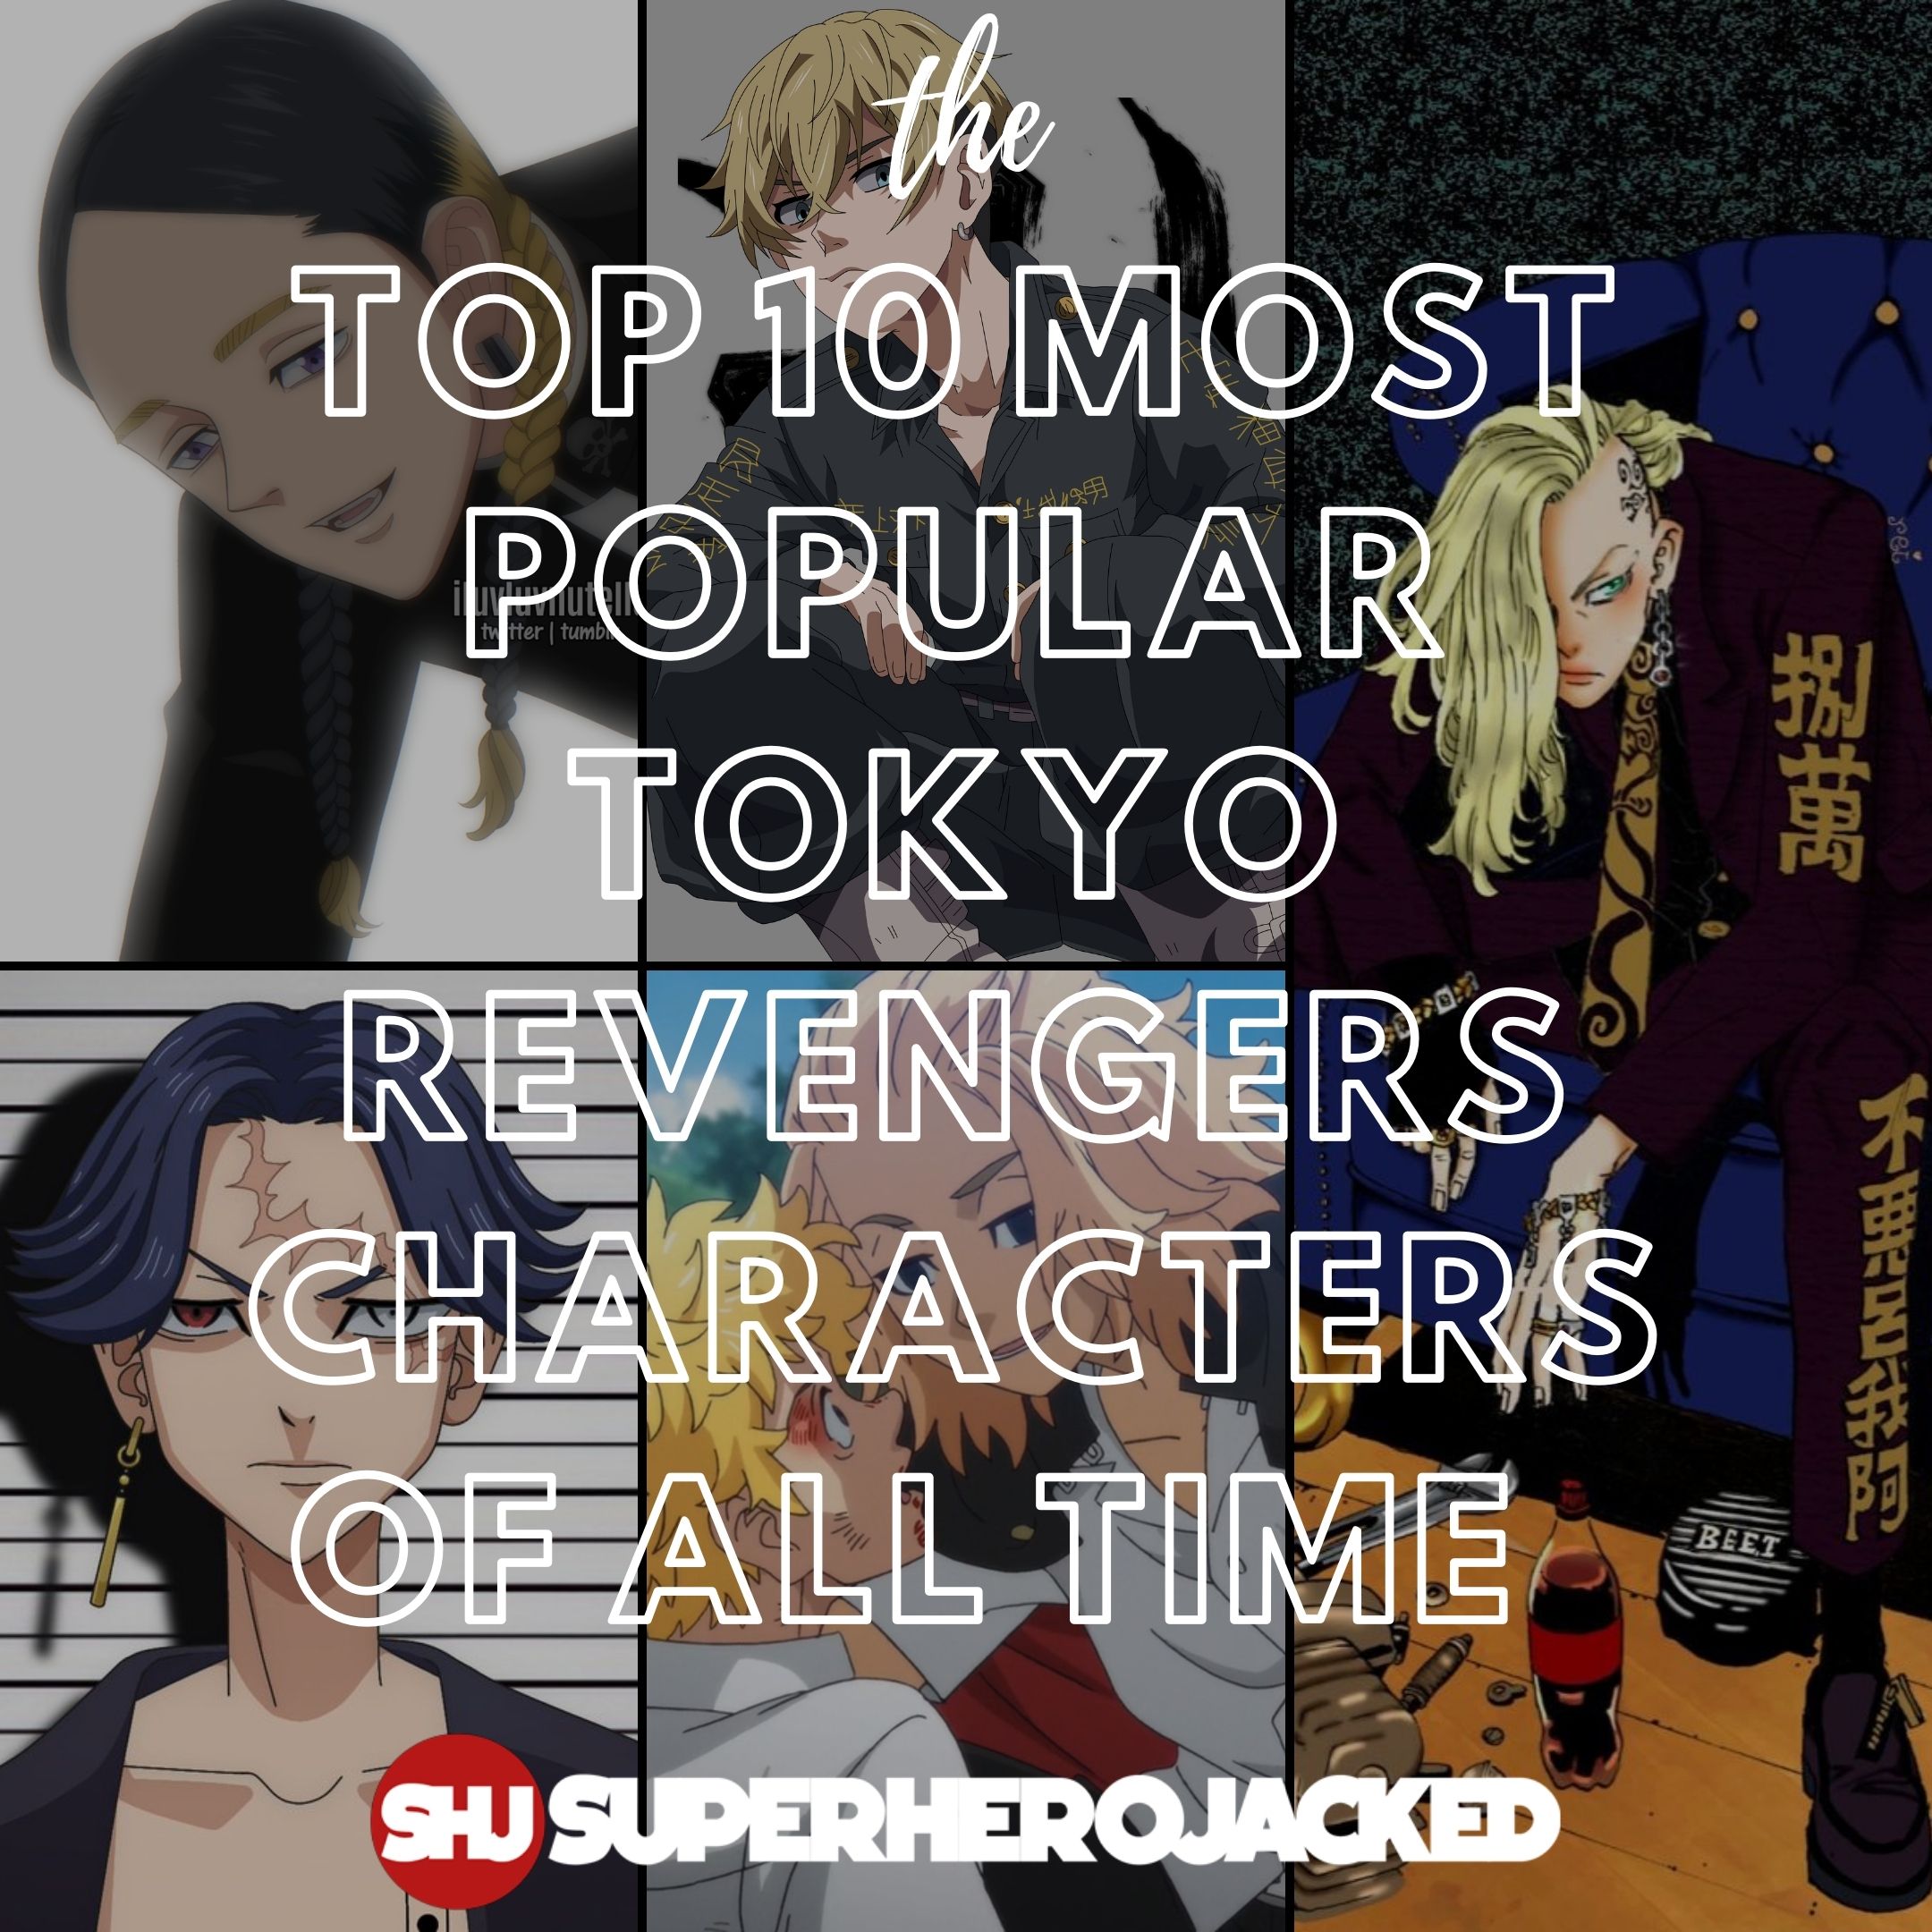 Tokyo Revengers: Are You Feared? - Quiz